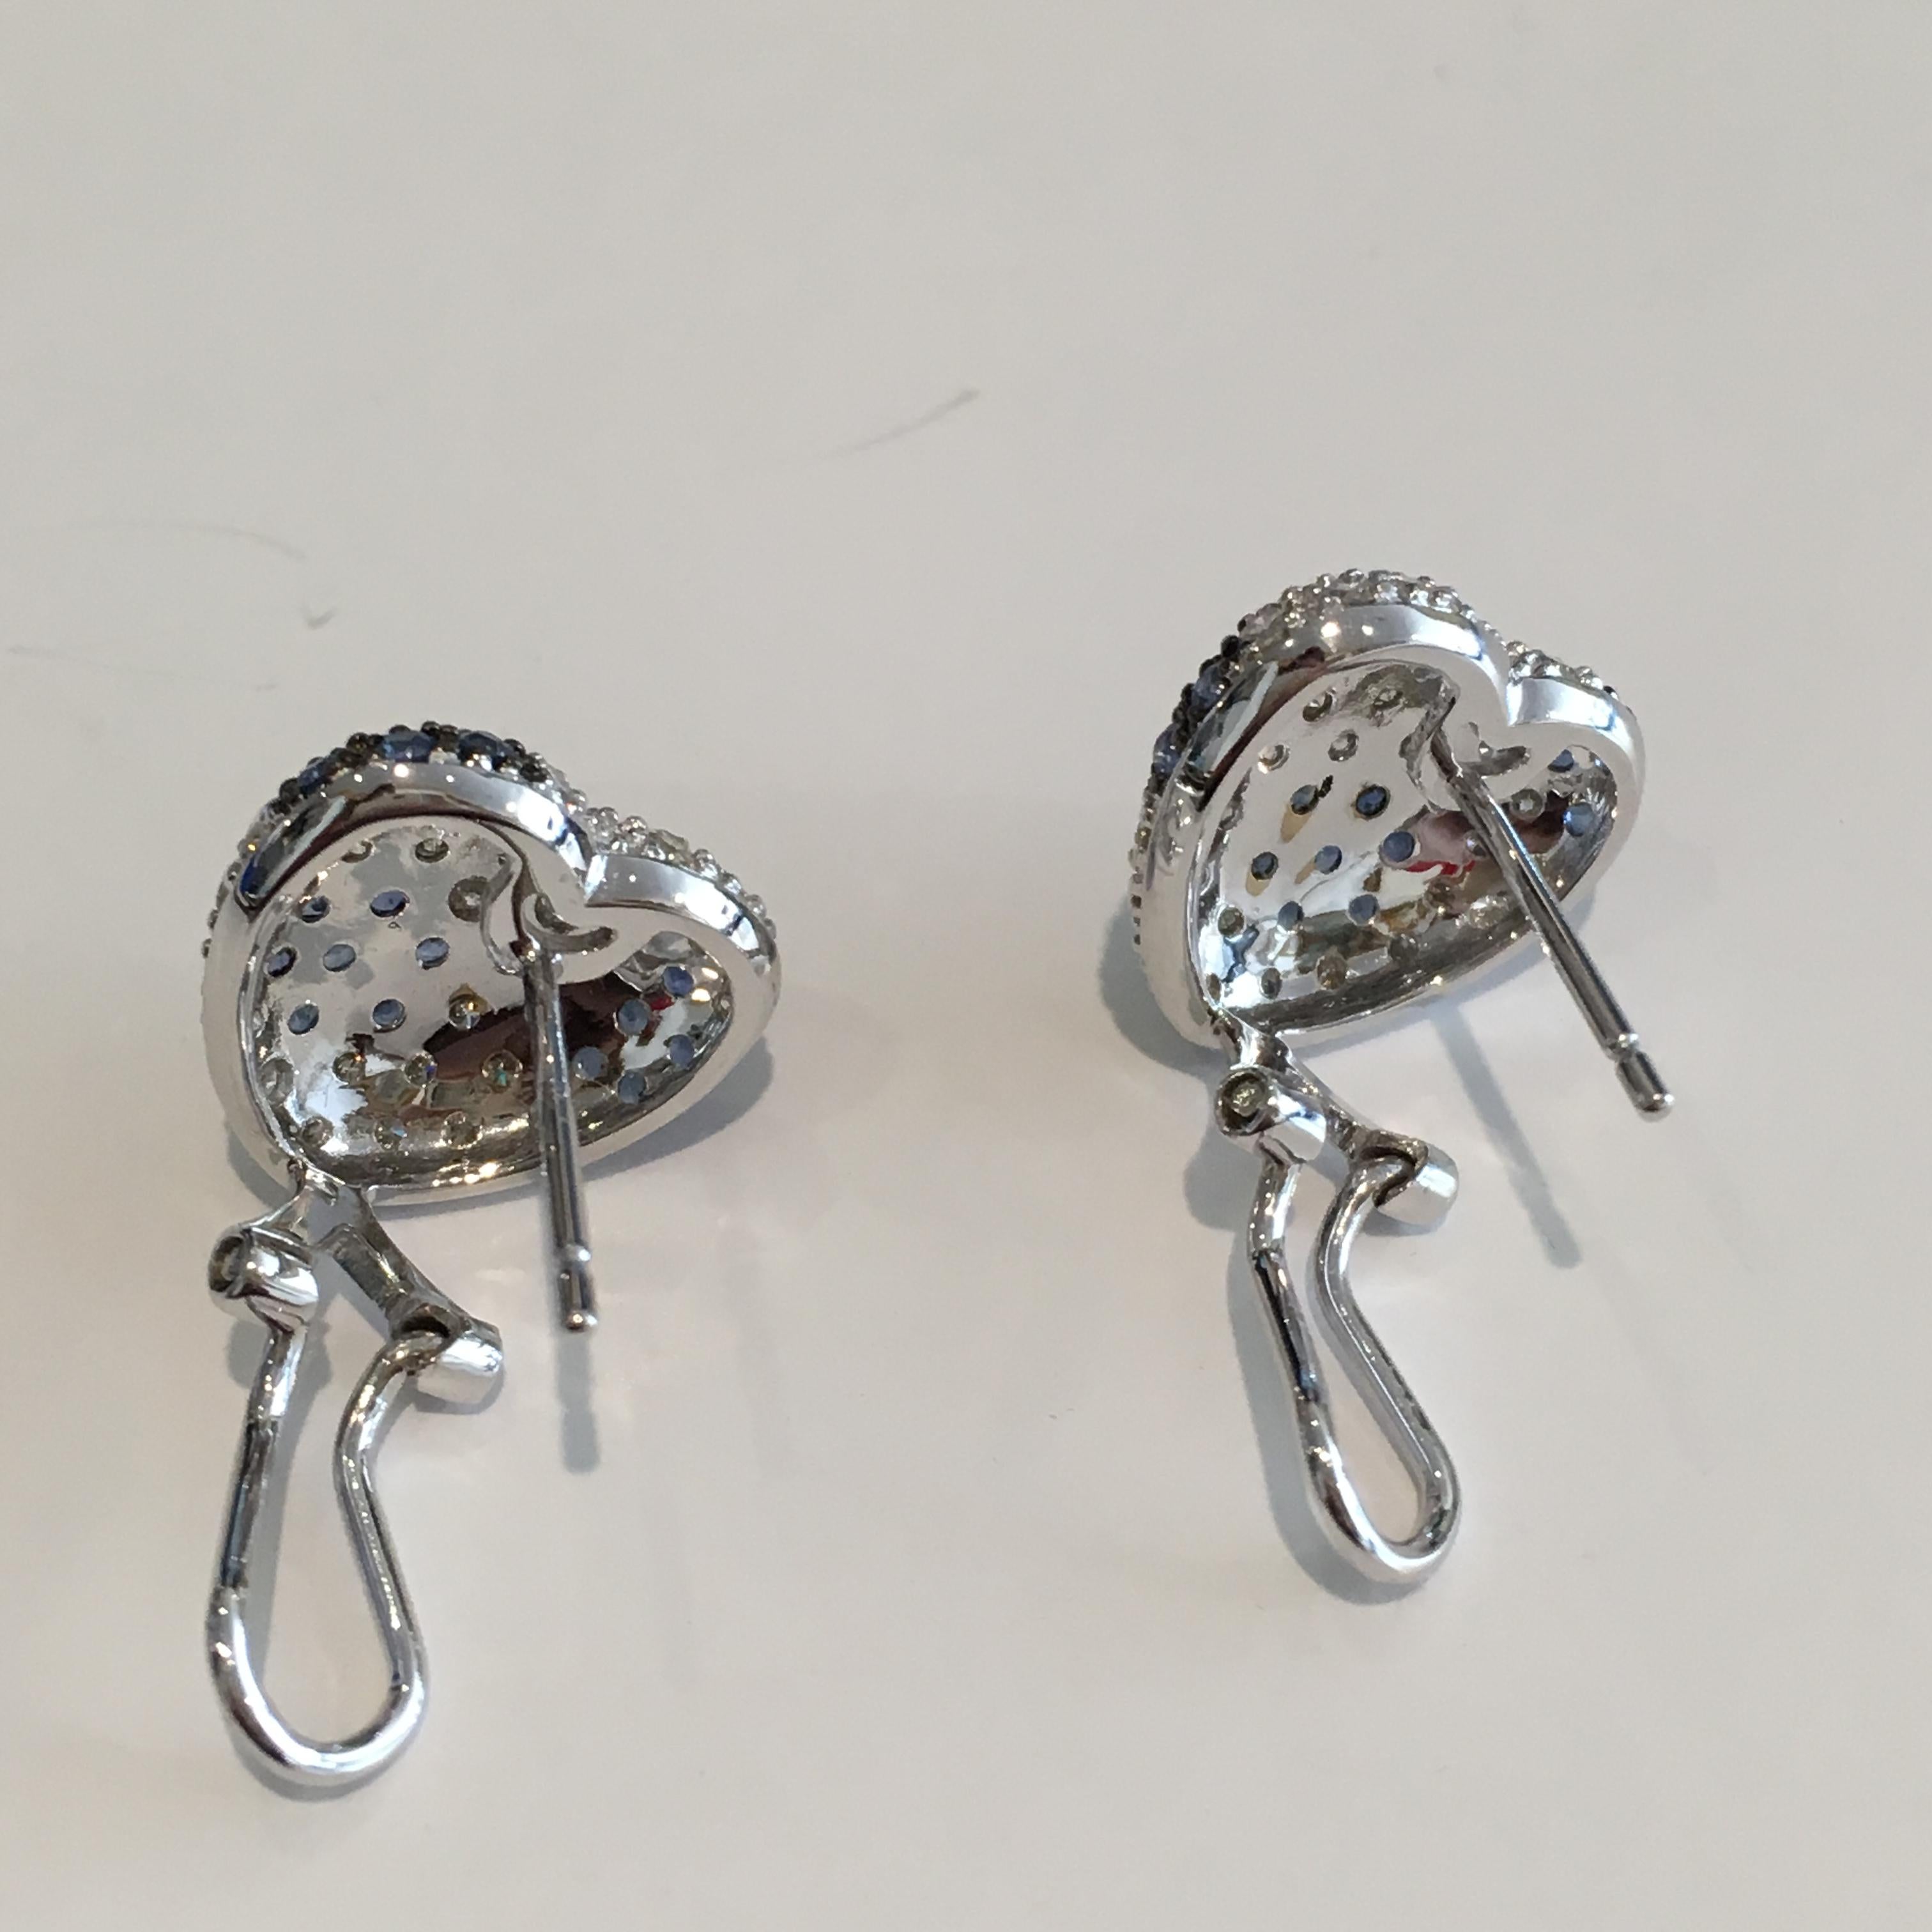 Ladies heart shaped earrings with diamond and sapphires set in 18k white gold.

Stamped 18k, 750 and weigh 6.2 grams.

The diamonds are round brilliant cuts, 1.80 total carats, i color, vs clarity.

The natural blue sapphires are a medium blue color